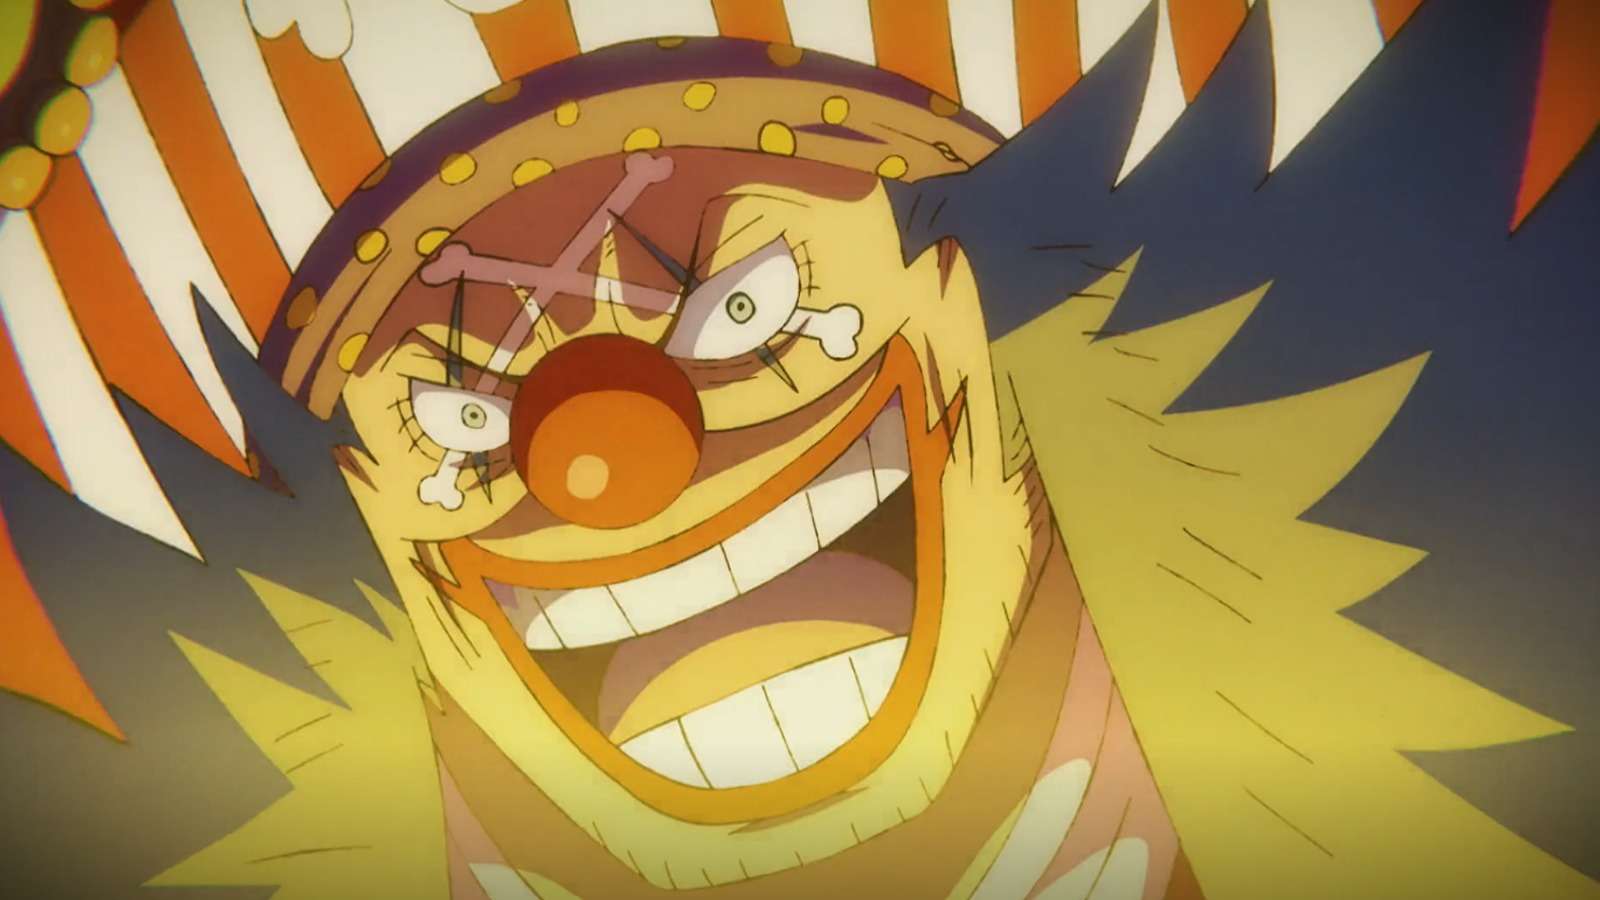 An image of the Yonko Buggy in One Piece